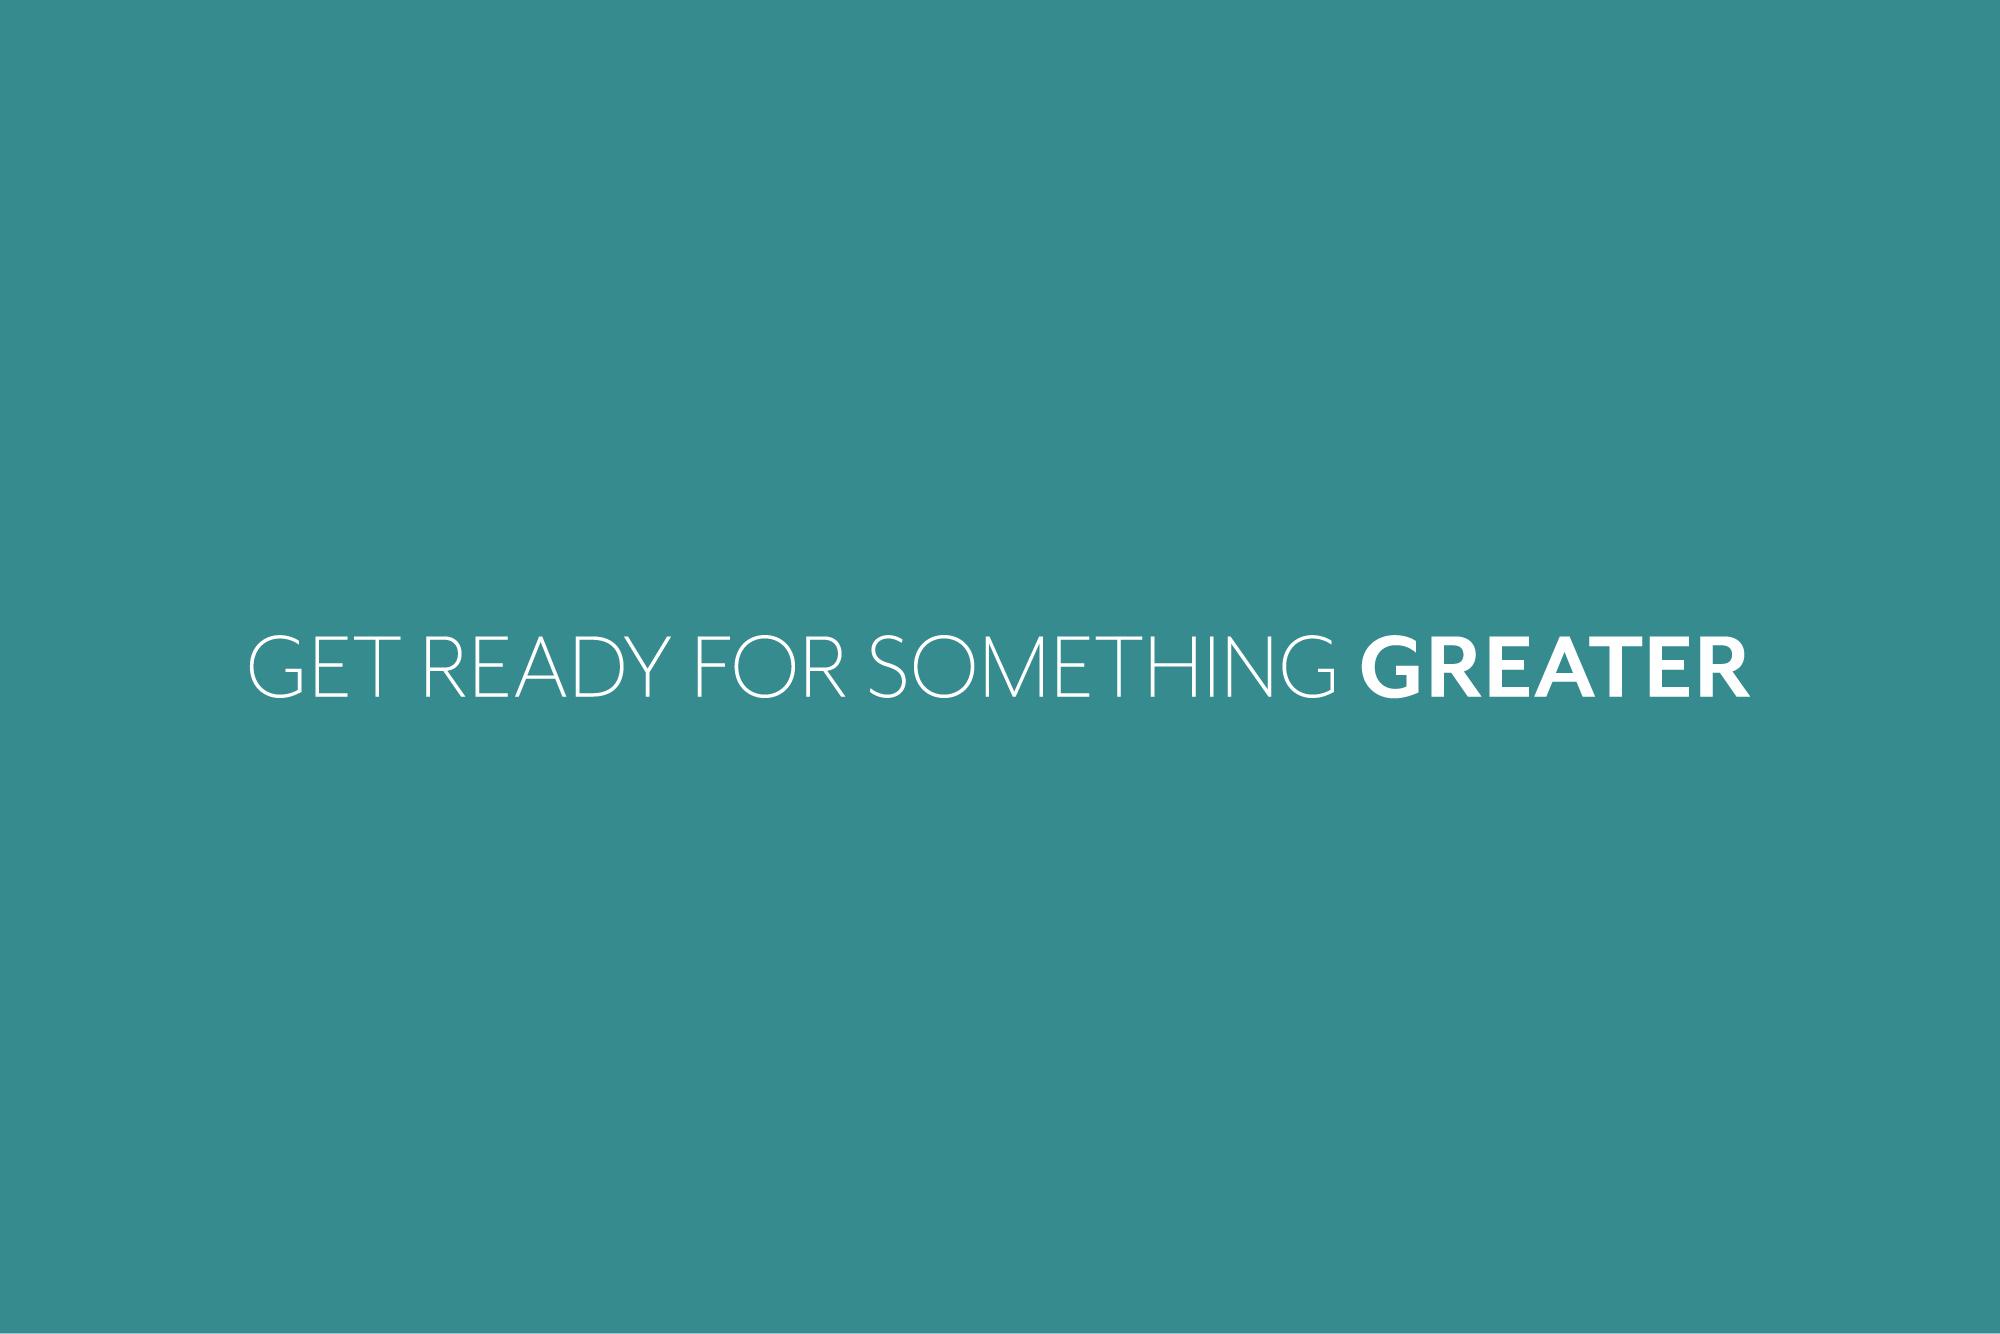 Tagline: Get Ready for Something Greater